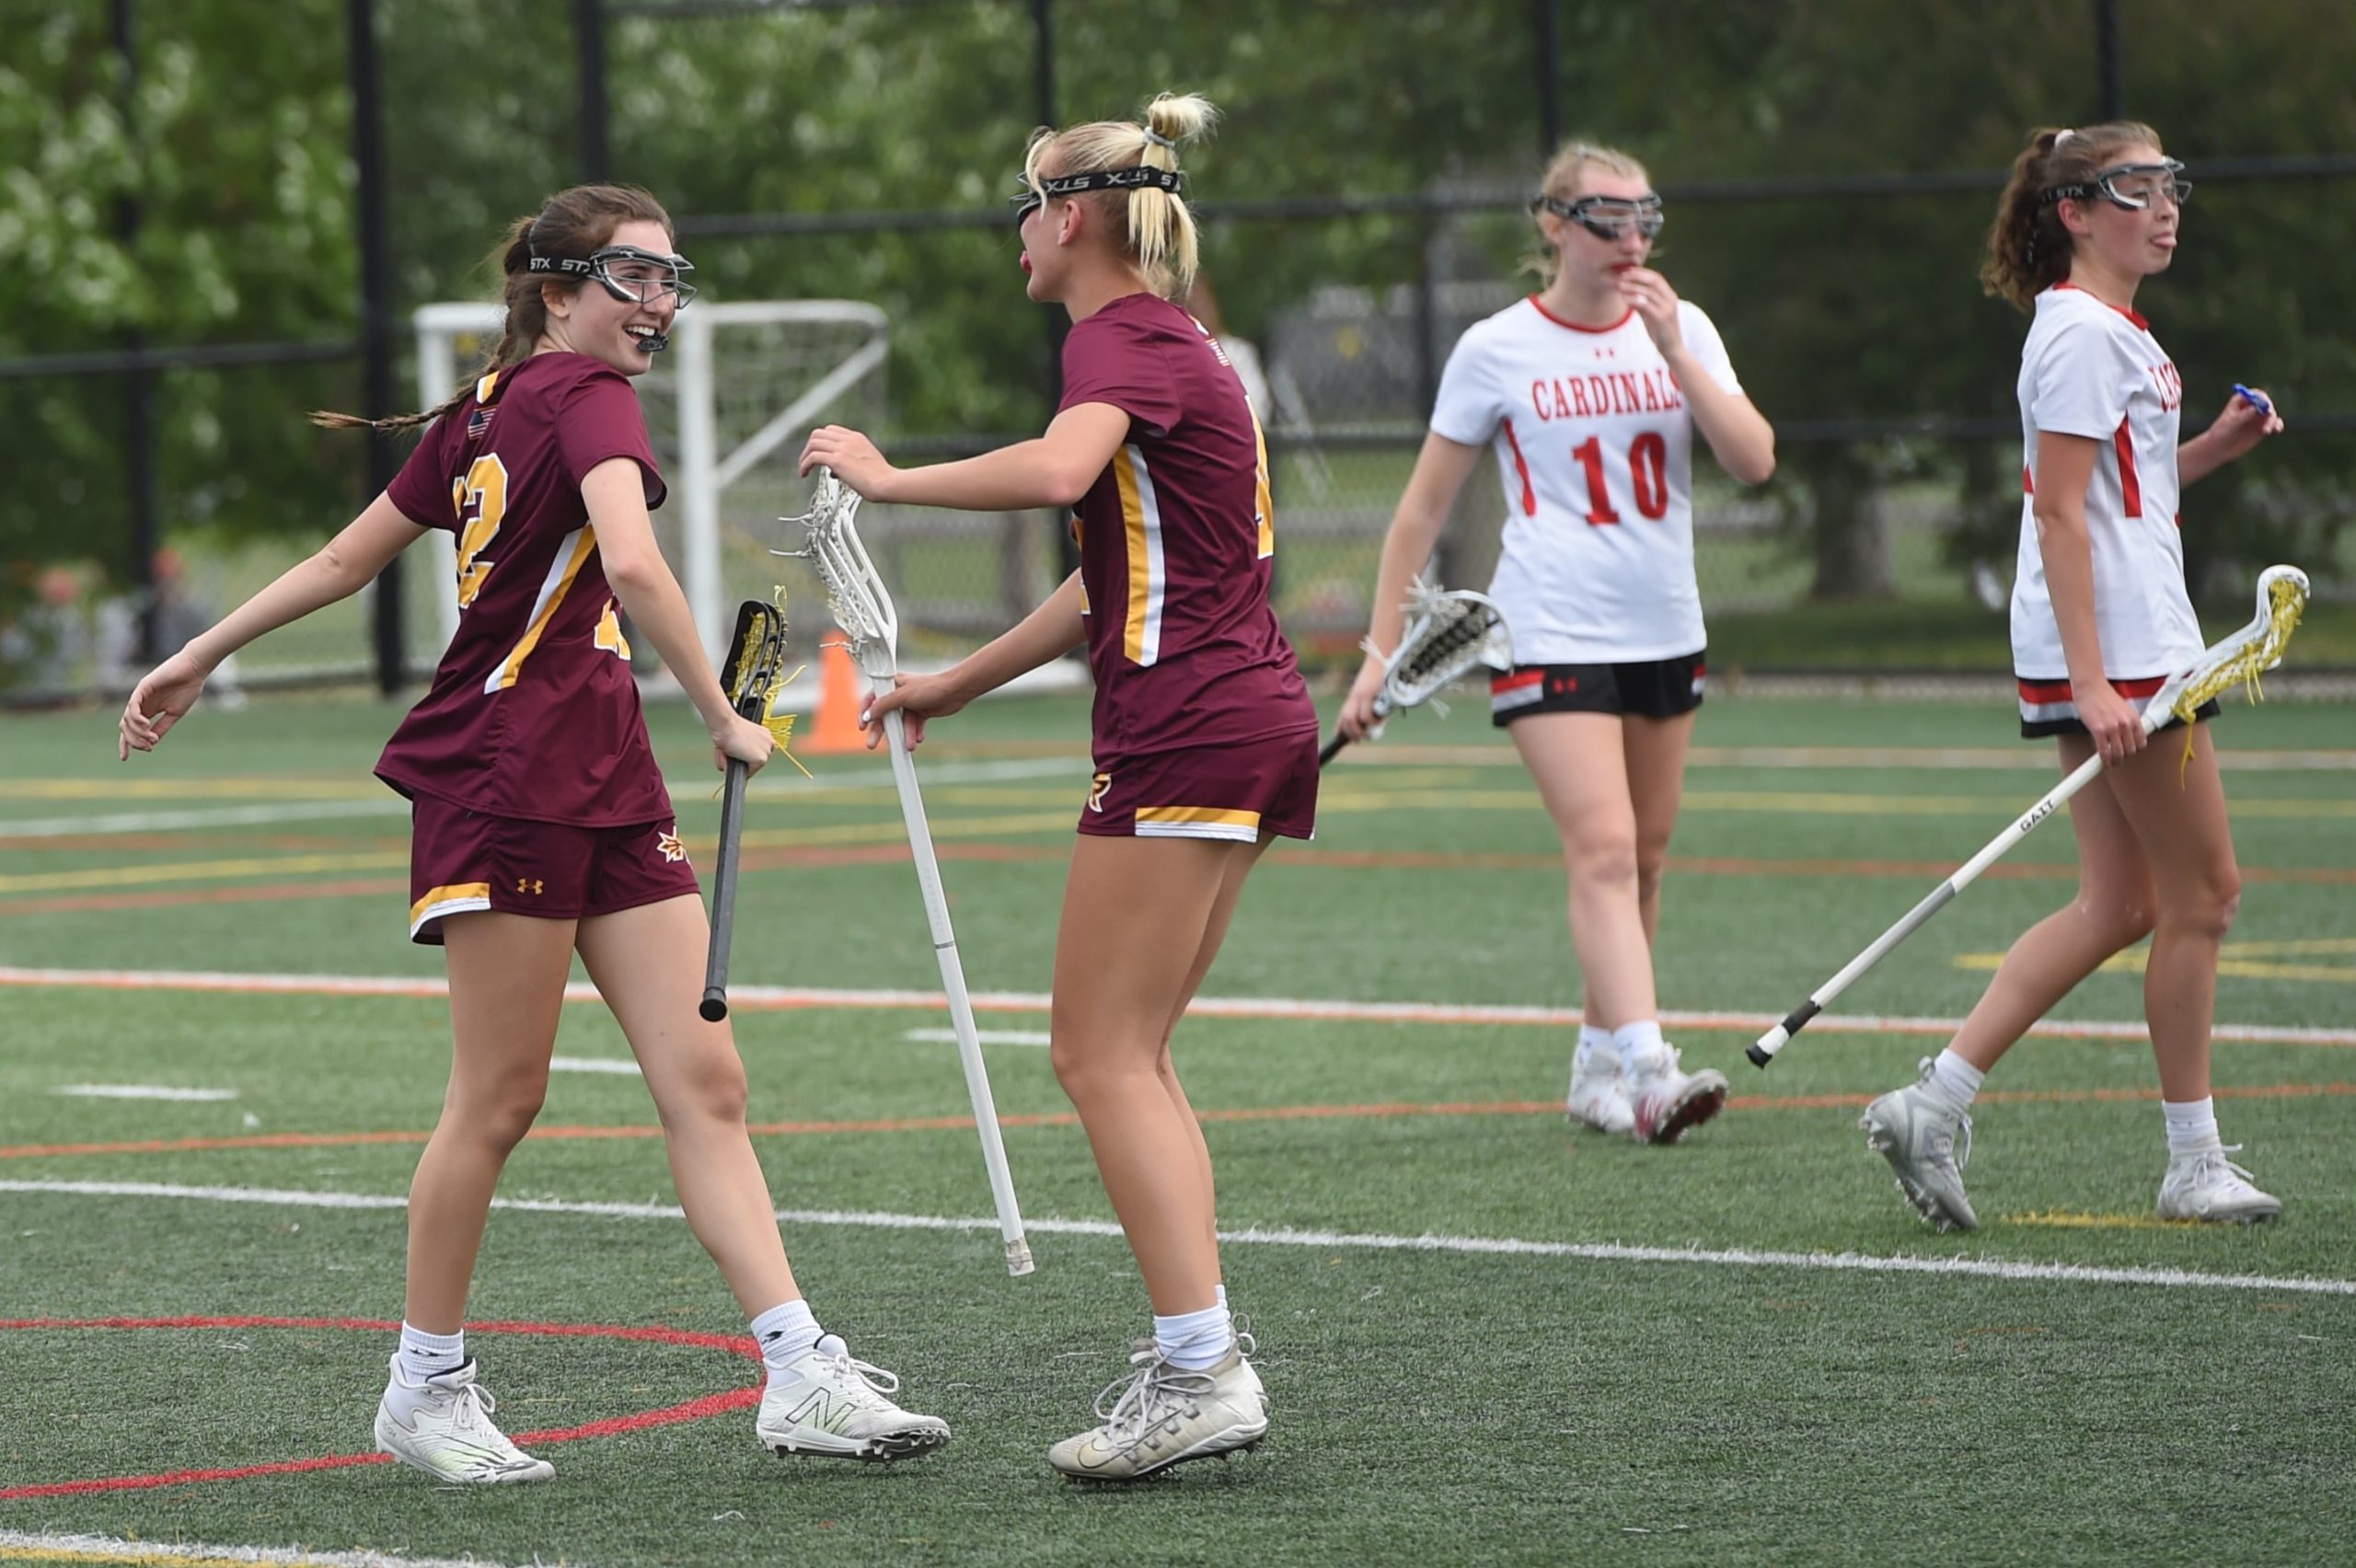 Avon Grove upsets Upper Dublin in first District 1 playoff game since